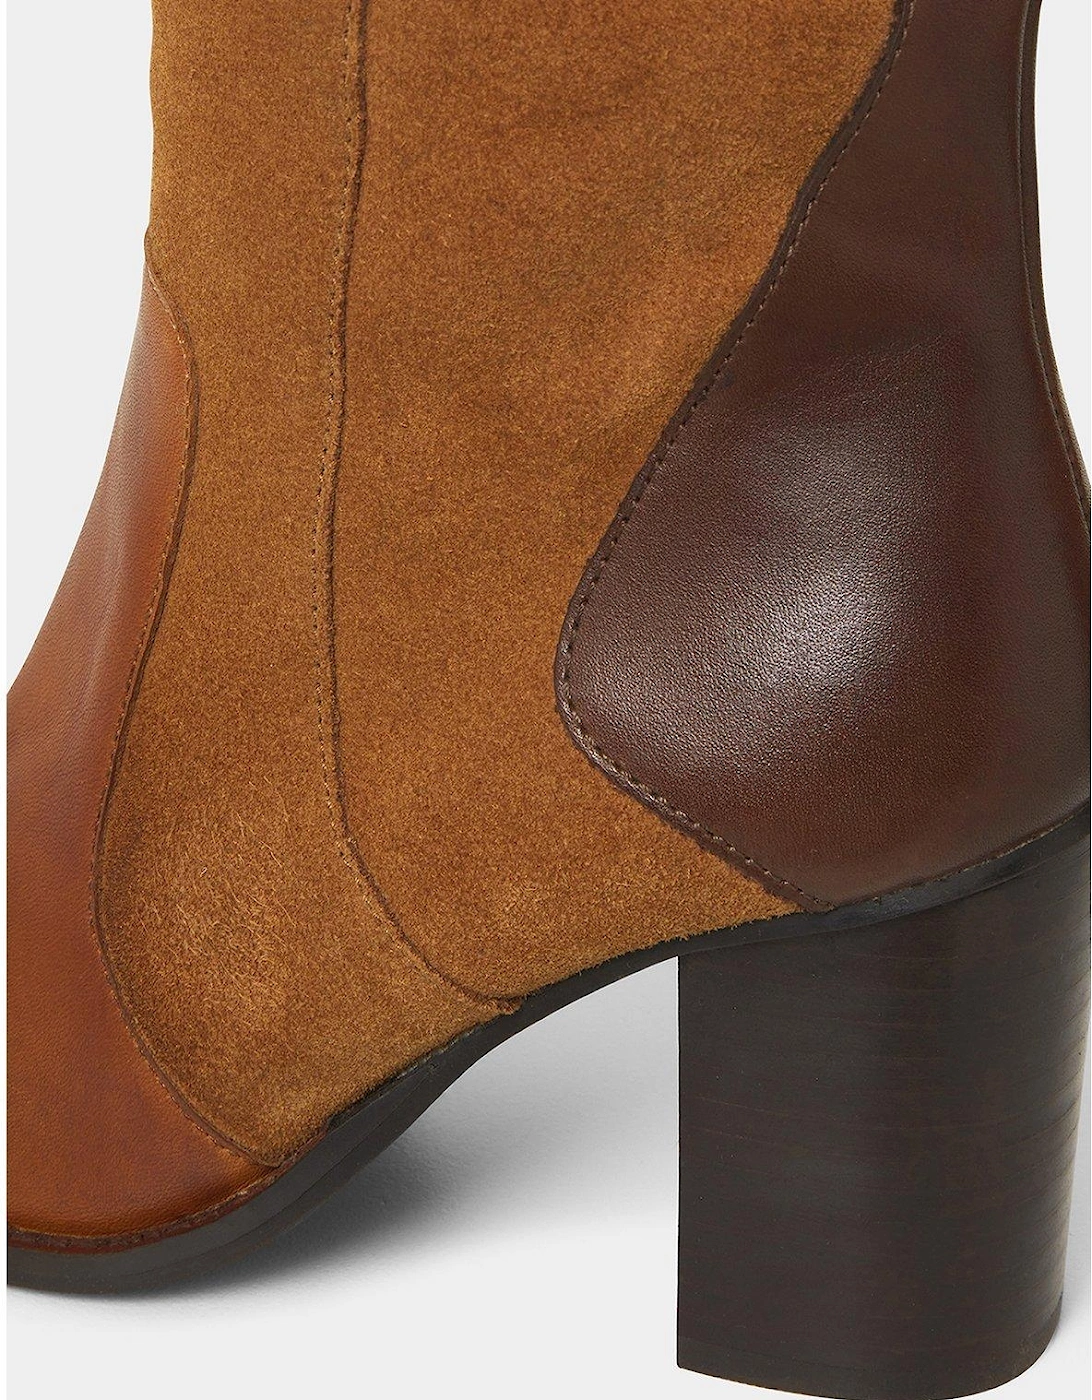 Made You Look Suede Leather Boots - Brown